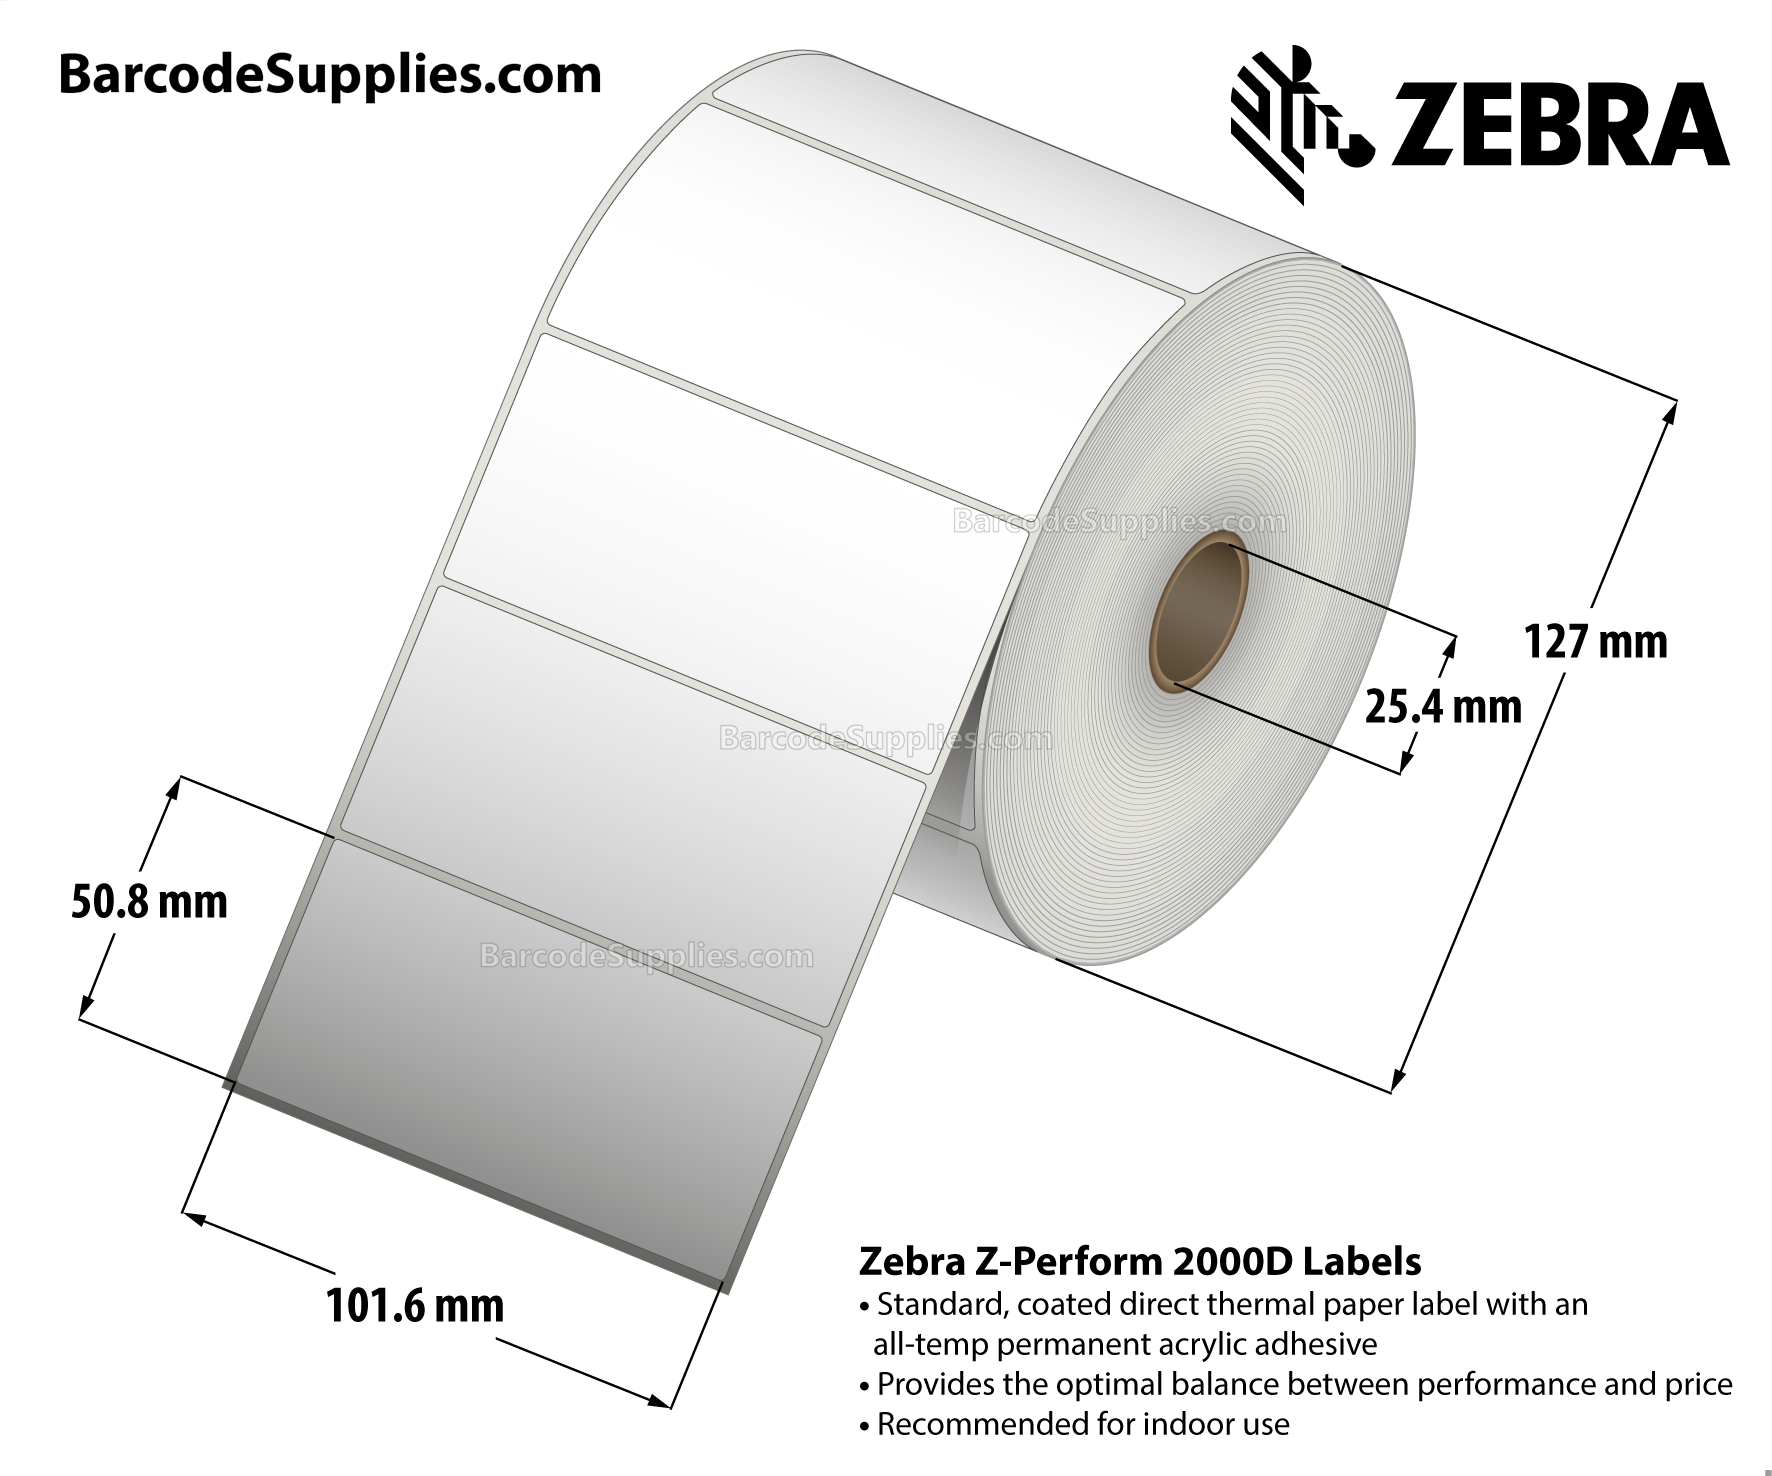 4 x 2 Direct Thermal White Z-Perform 2000D (No Perf) Labels With All-Temp Adhesive - Not Perforated - 1240 Labels Per Roll - Carton Of 6 Rolls - 7440 Labels Total - MPN: 10012163